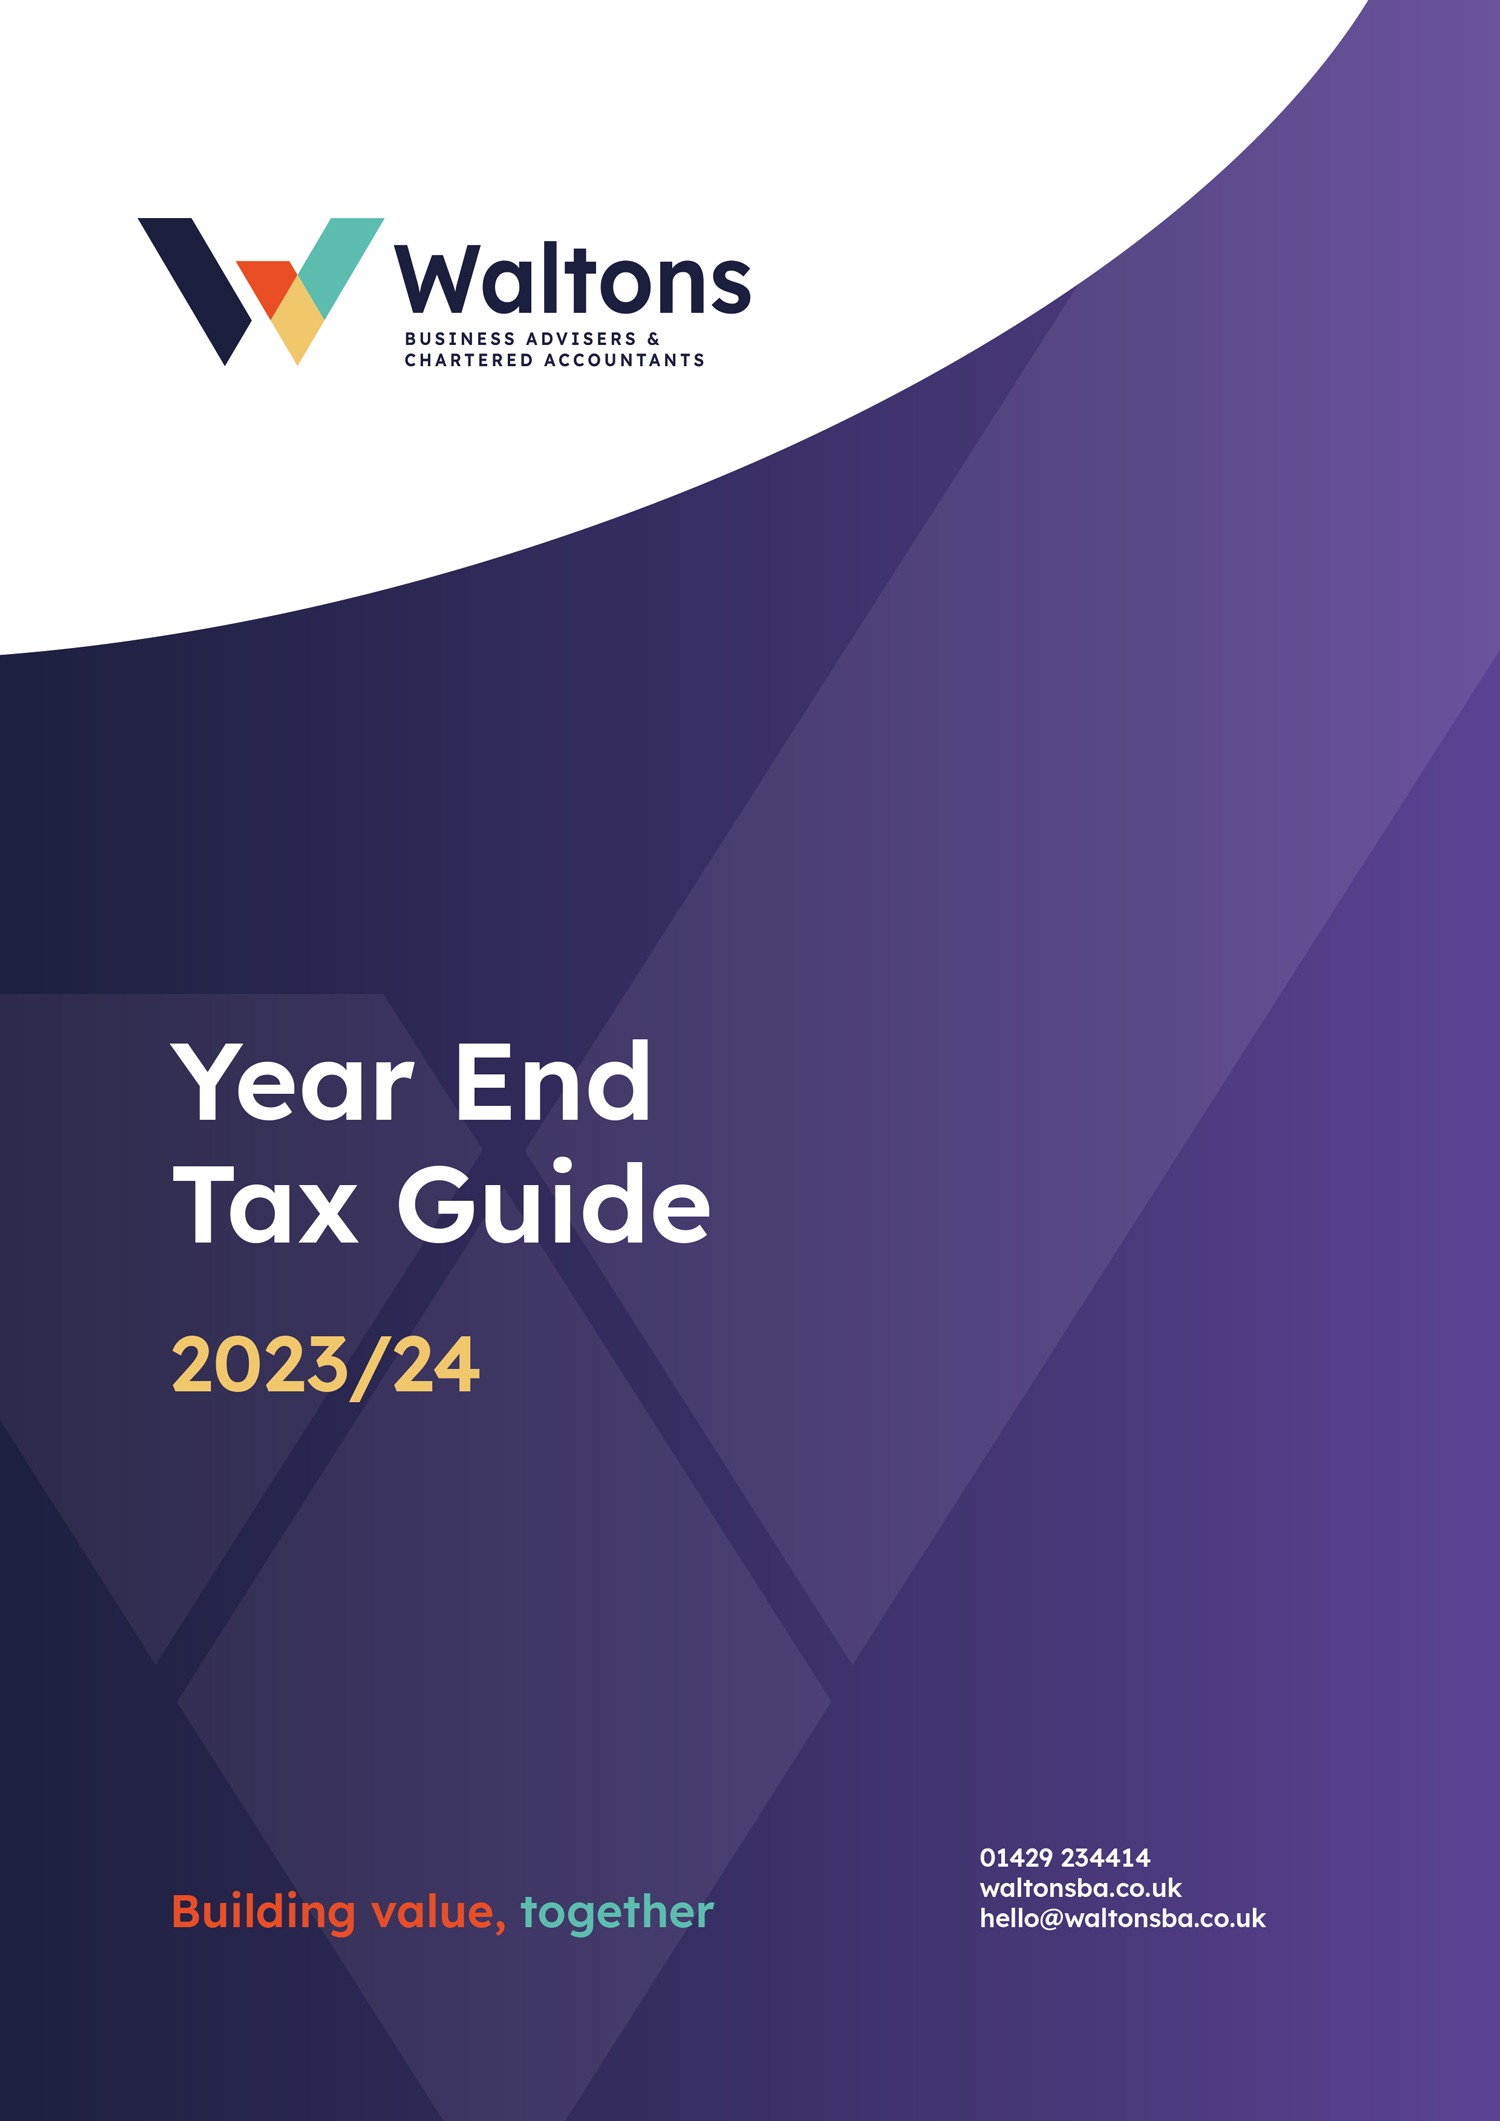 Year End Tax Guide 2023/24